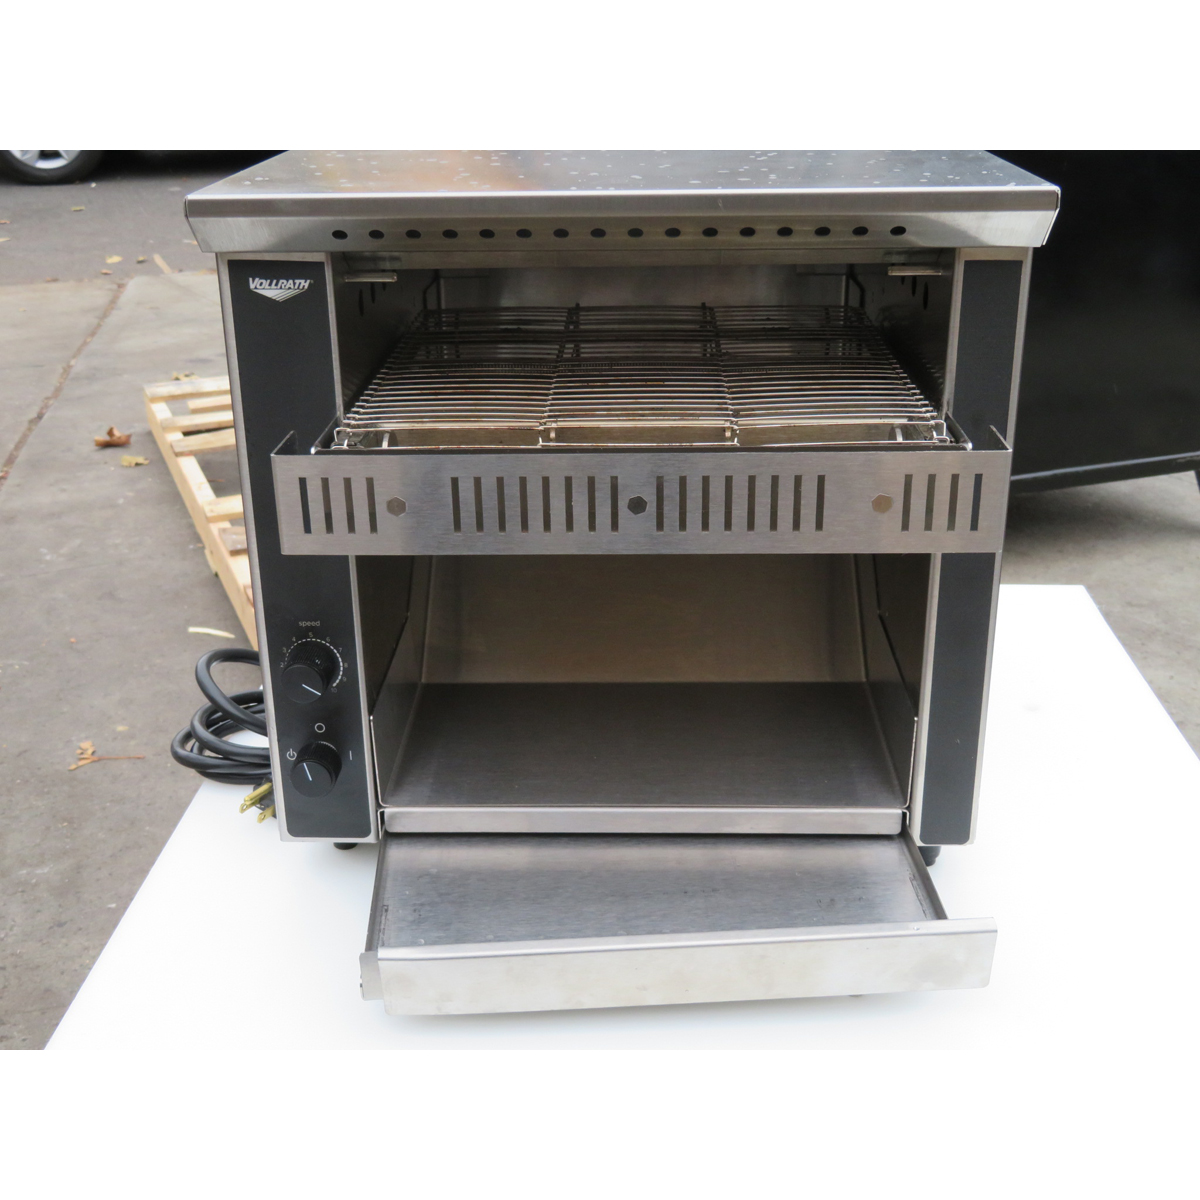 Vollrath JT1-H Conveyor Toaster 1600W, Used Excellent Condition (Used as Demo) image 1